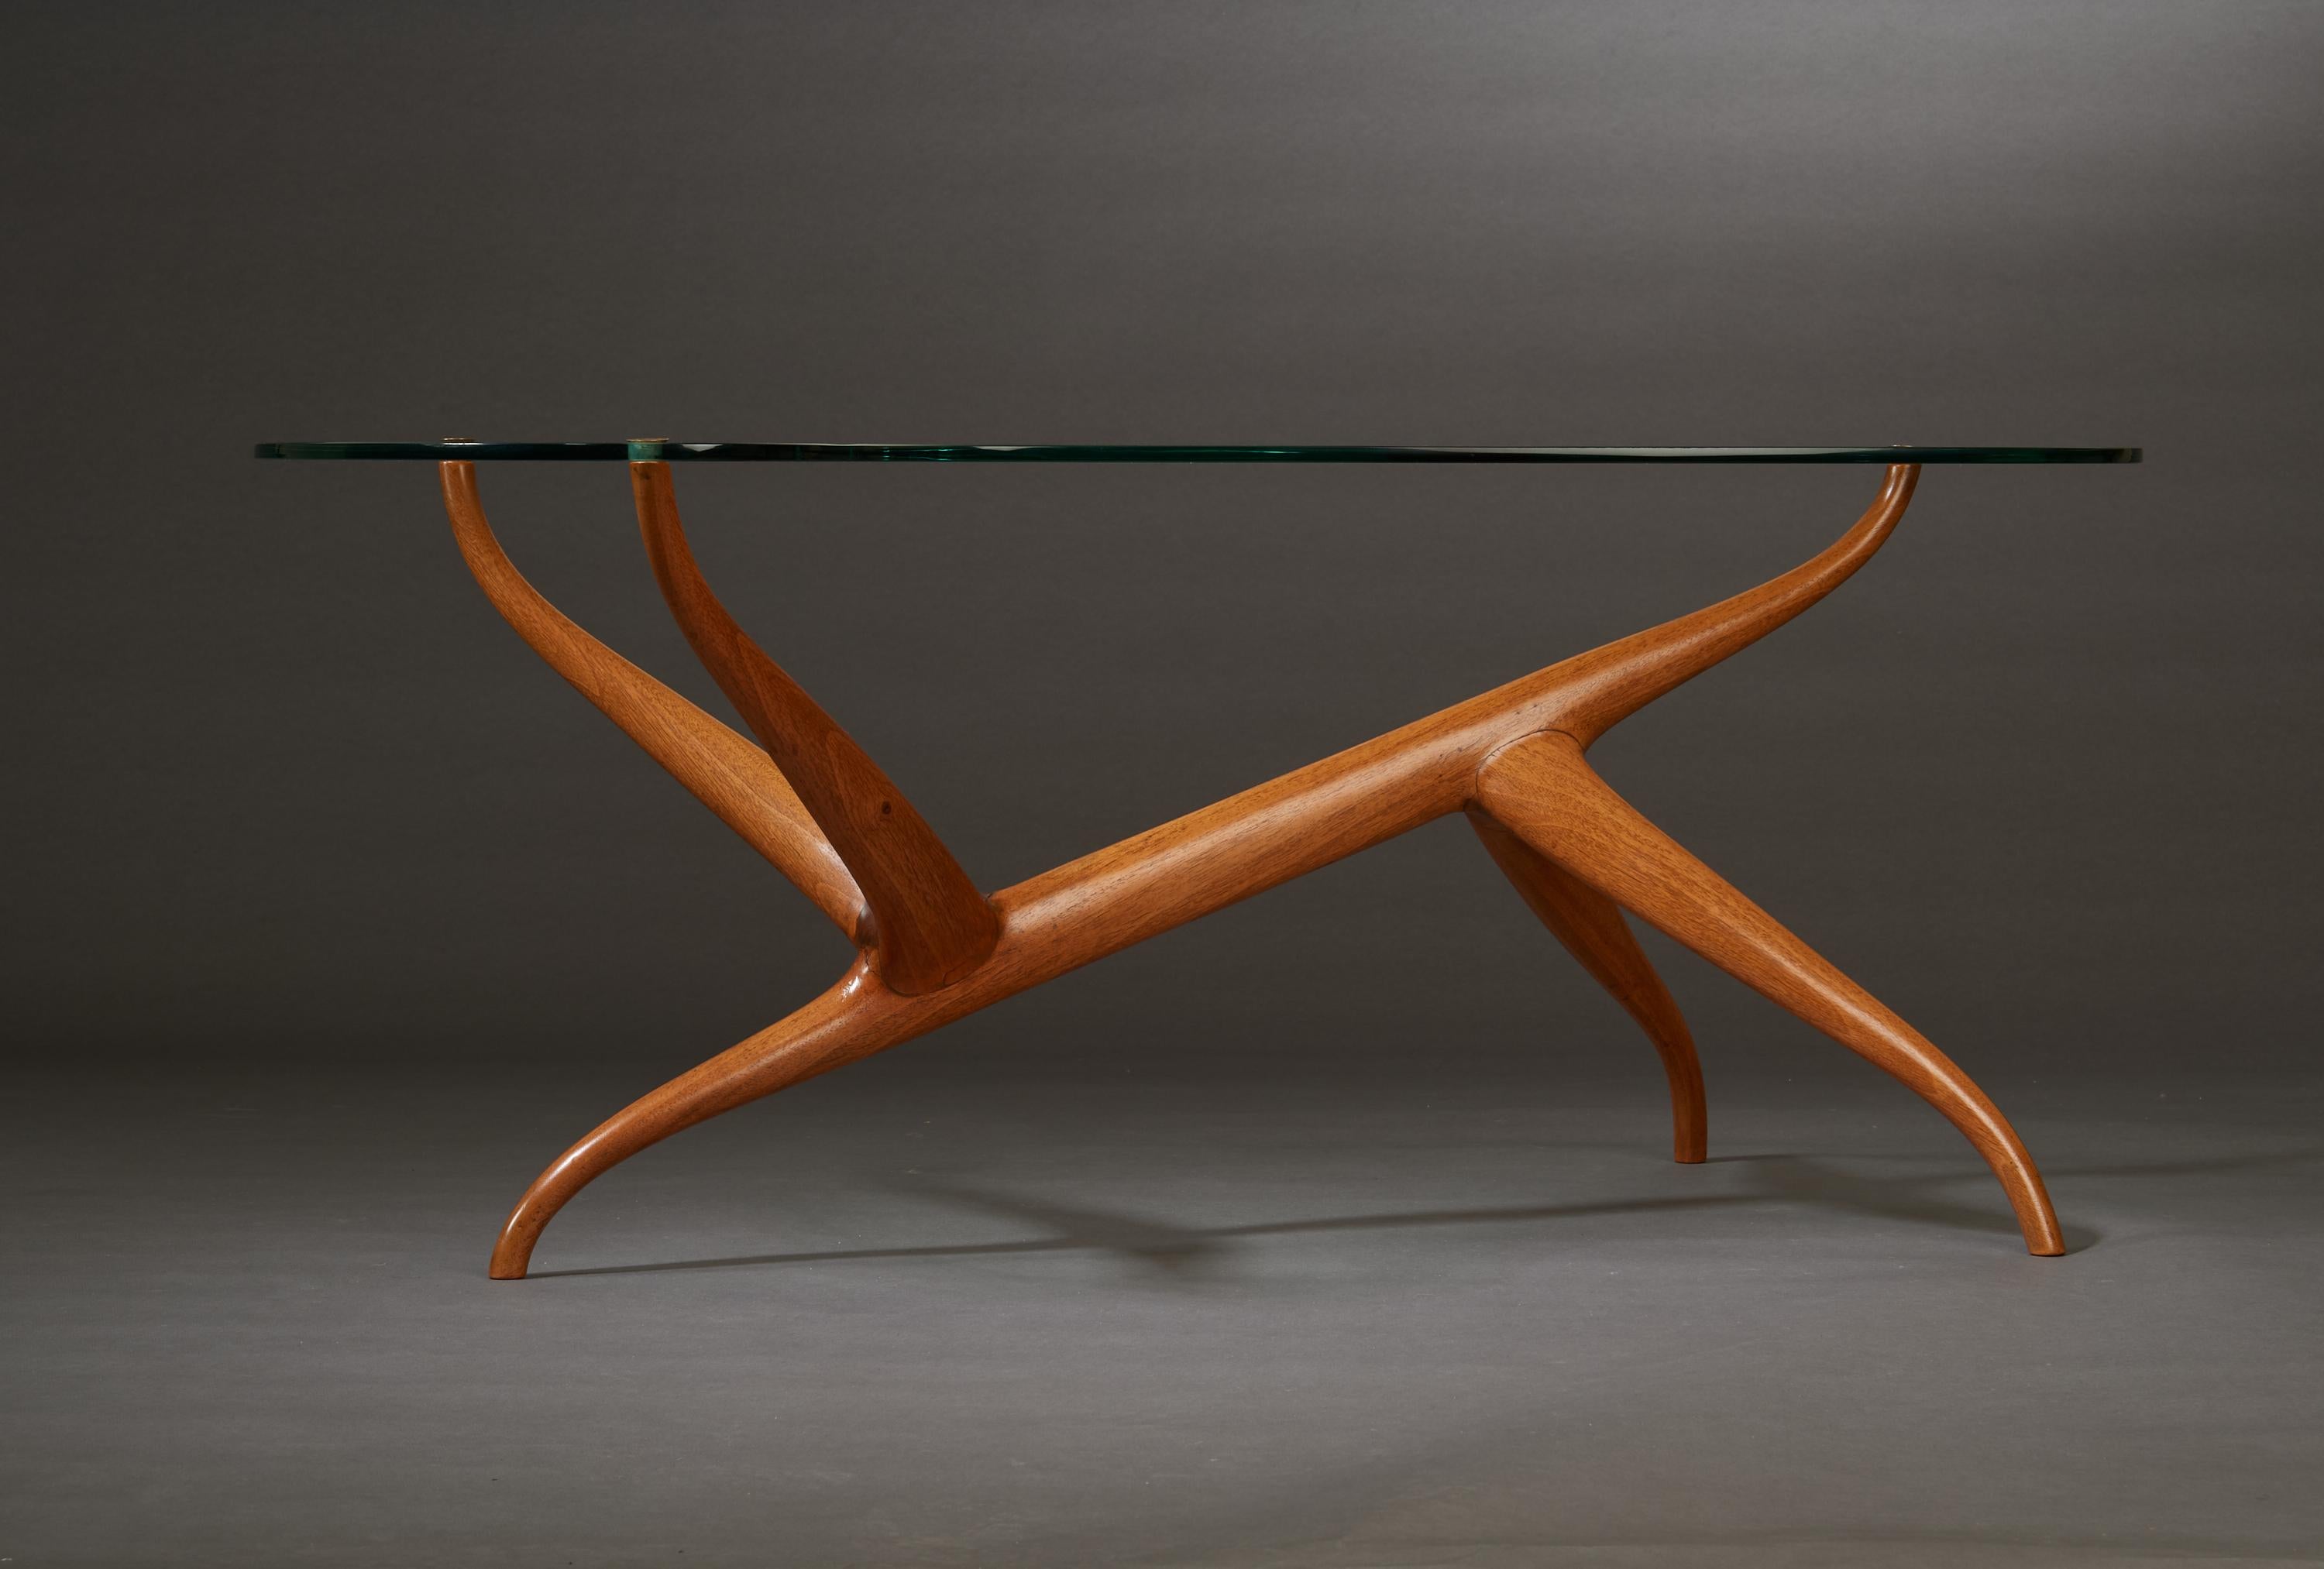 Pierluigi Giordani: Exceptional Sculptural Oak & Glass Coffee Table, Italy 1950s For Sale 1